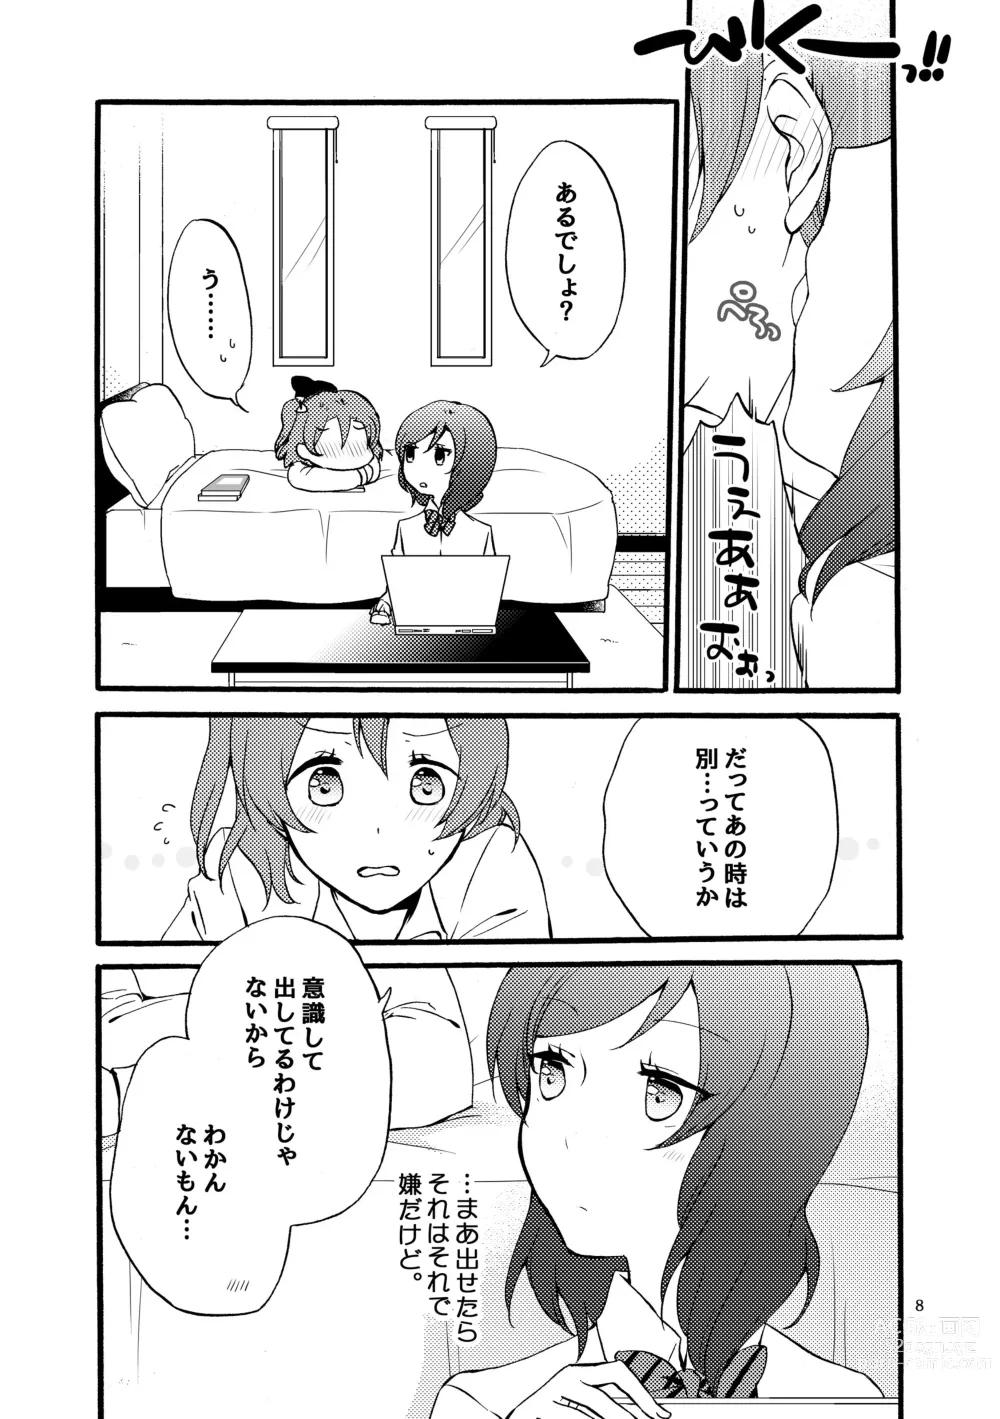 Page 7 of doujinshi Nishikino-shiki Hassei Renshuu - What are the contents of this vocal exercises?